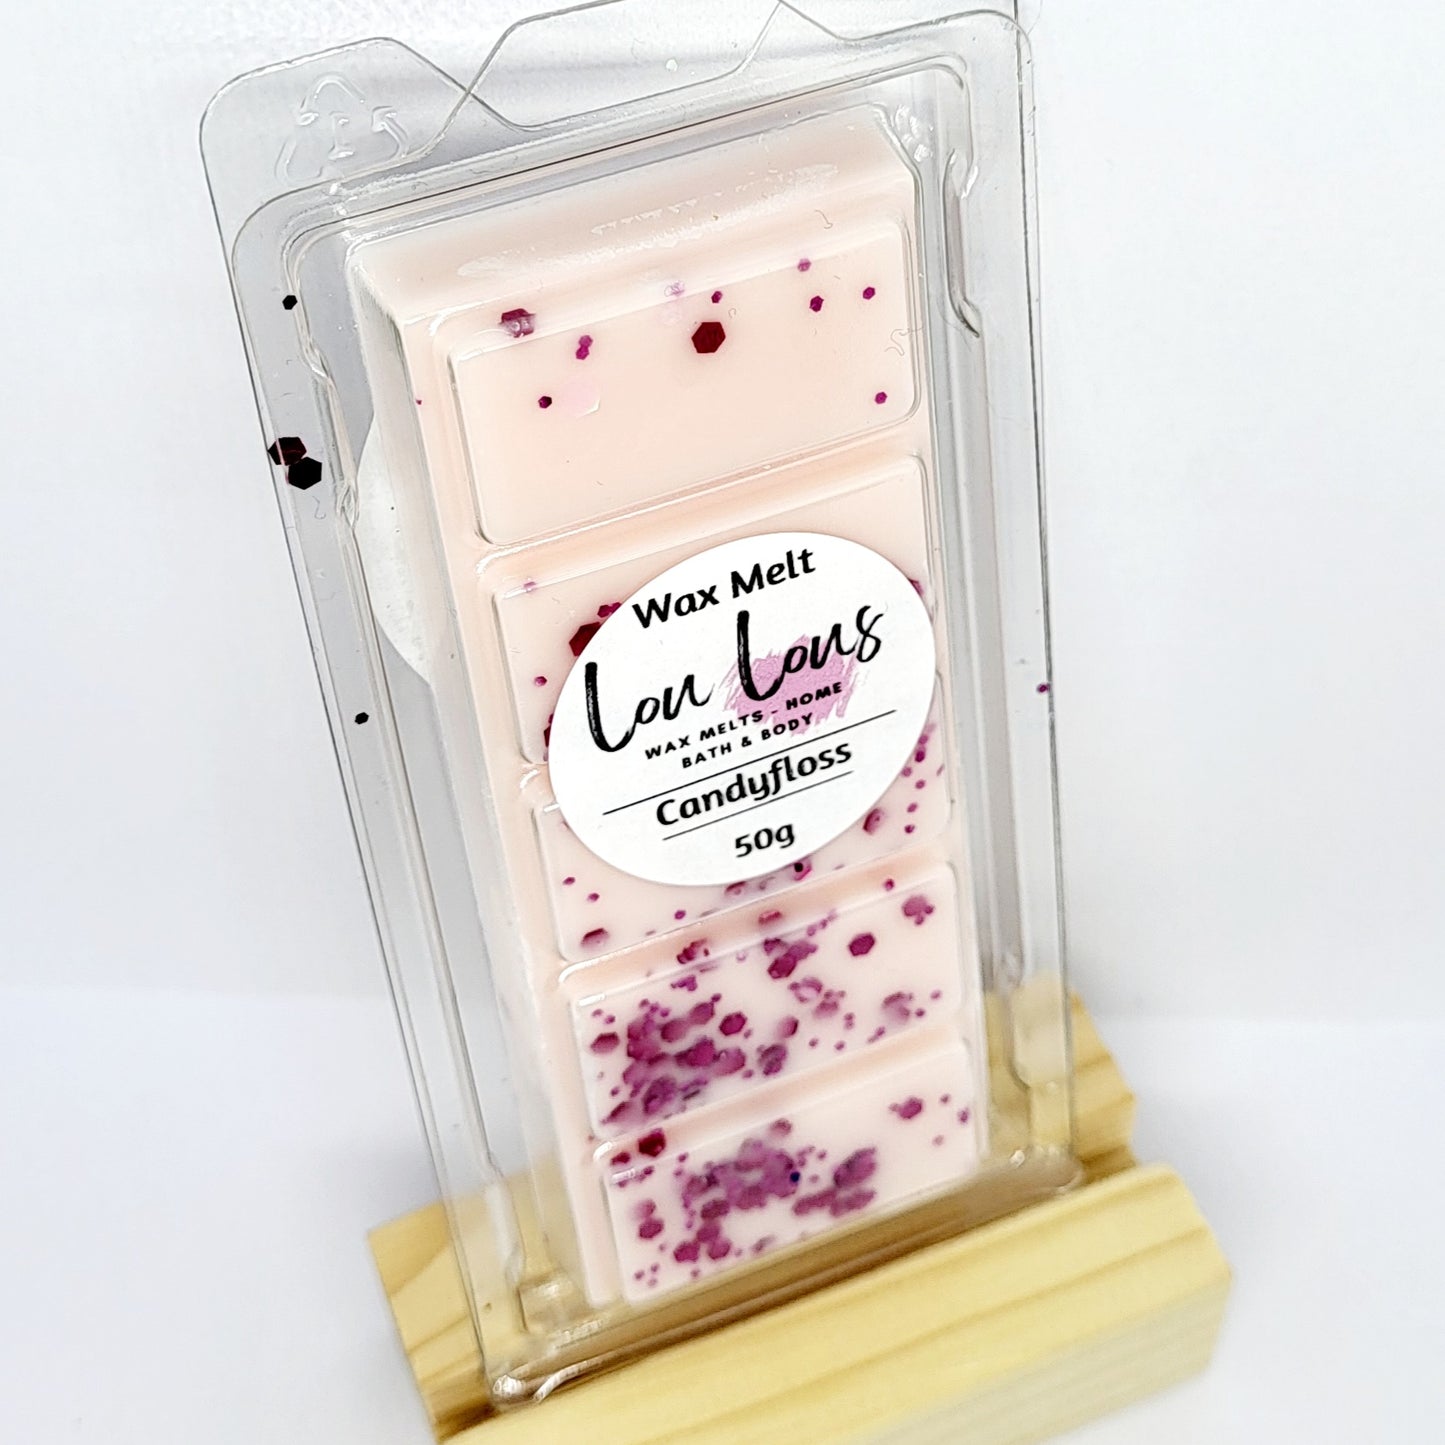 Wax melt snap bar scented in candyfloss